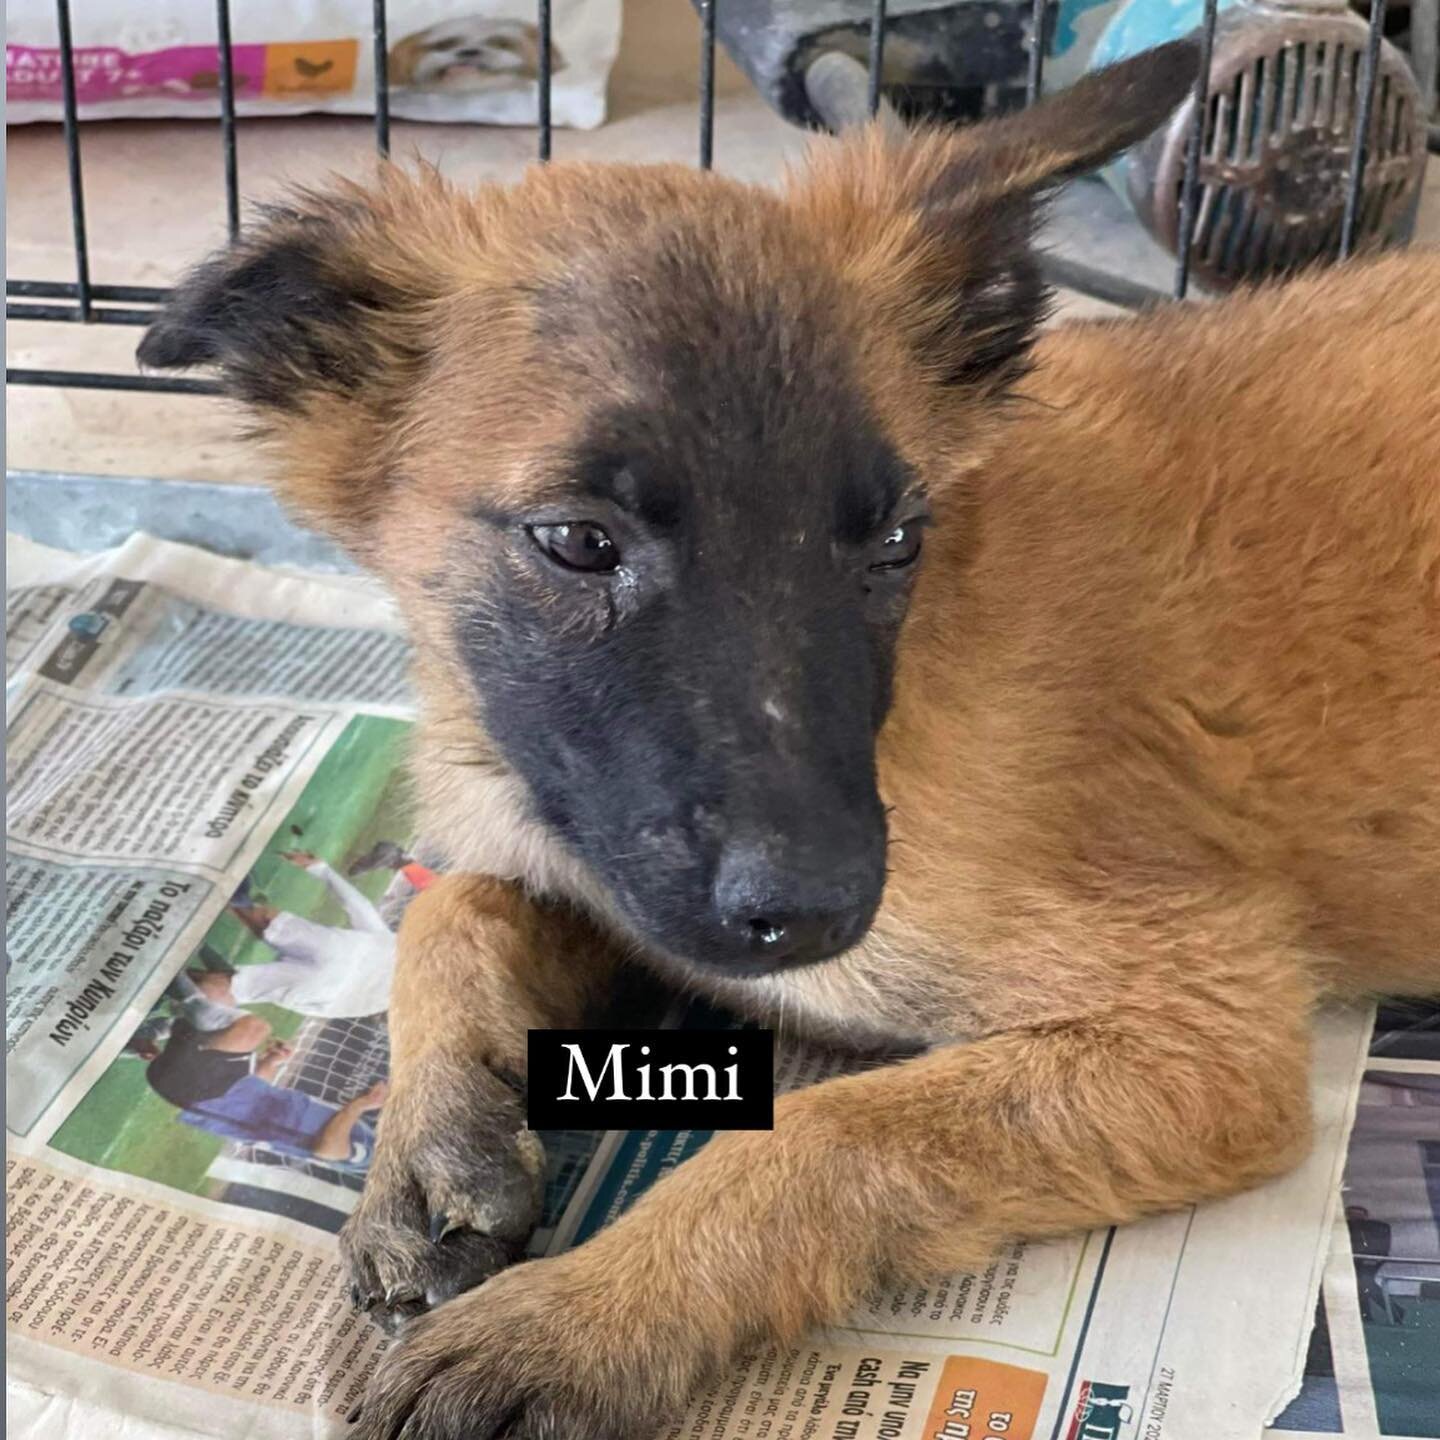 Cute MIMI &hearts;️ is now available for adoption! 
A sweet 3 month old puppy. Meg our oldie is in love with her and she allows her to share bed with her. She a cuddly loving playful puppy that was rescued from a field in the middle of nowhere. We le